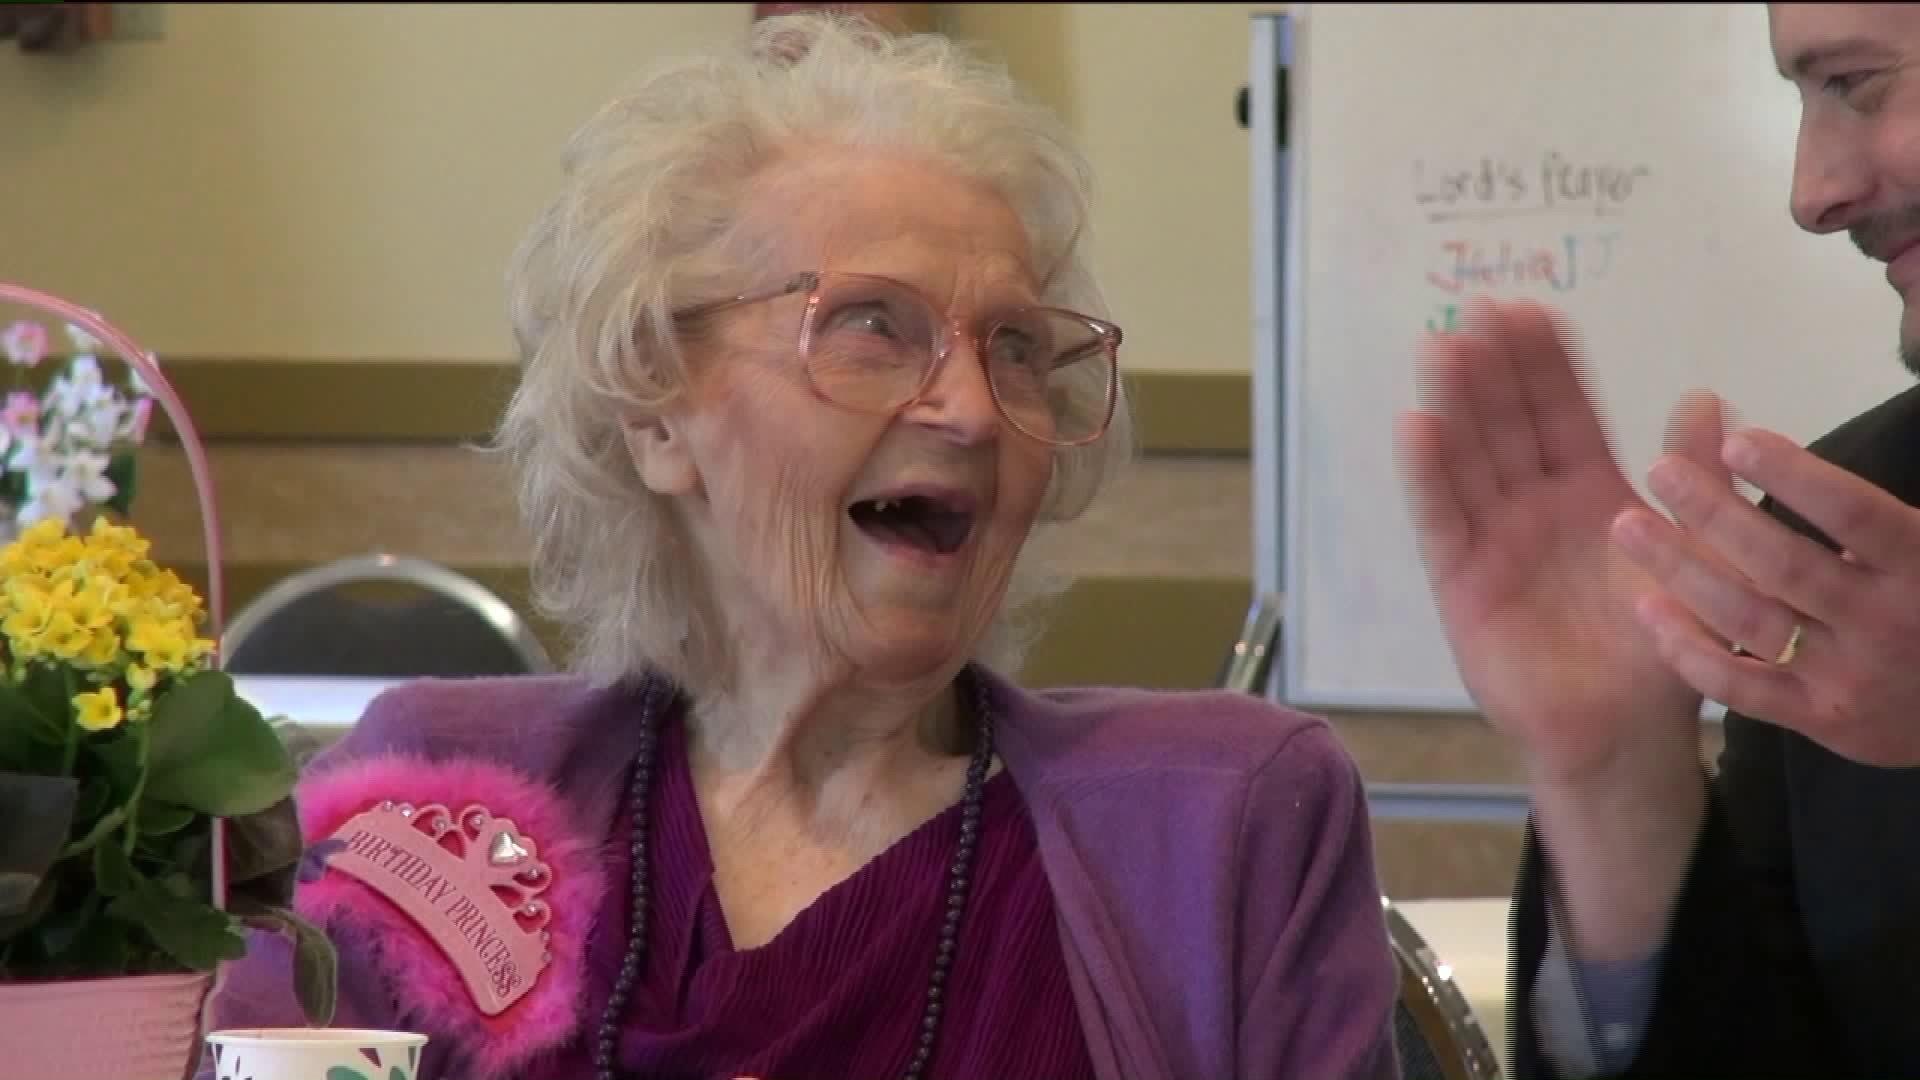 Celebrating Woman's 100th Birthday with Cards, Cakes, and Smiles